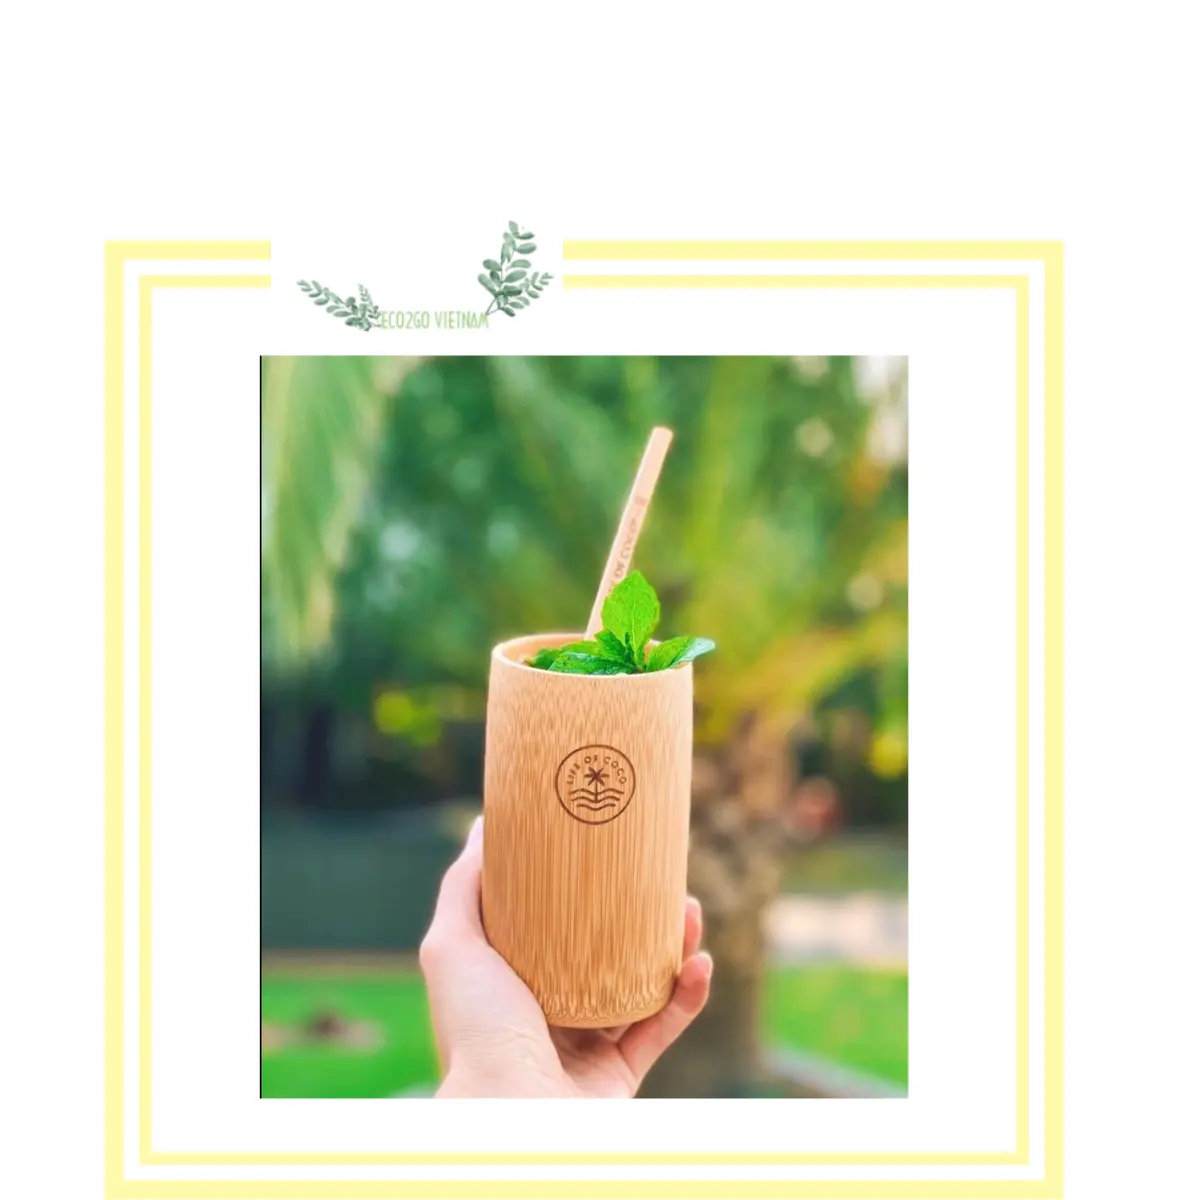 SALE OFF 2024 !!! NEW PRODUCT FOR BAMBOO CUP 100% NATURAL MADE IN VIETNAM FRIENDLY ENVIRONMENTAL